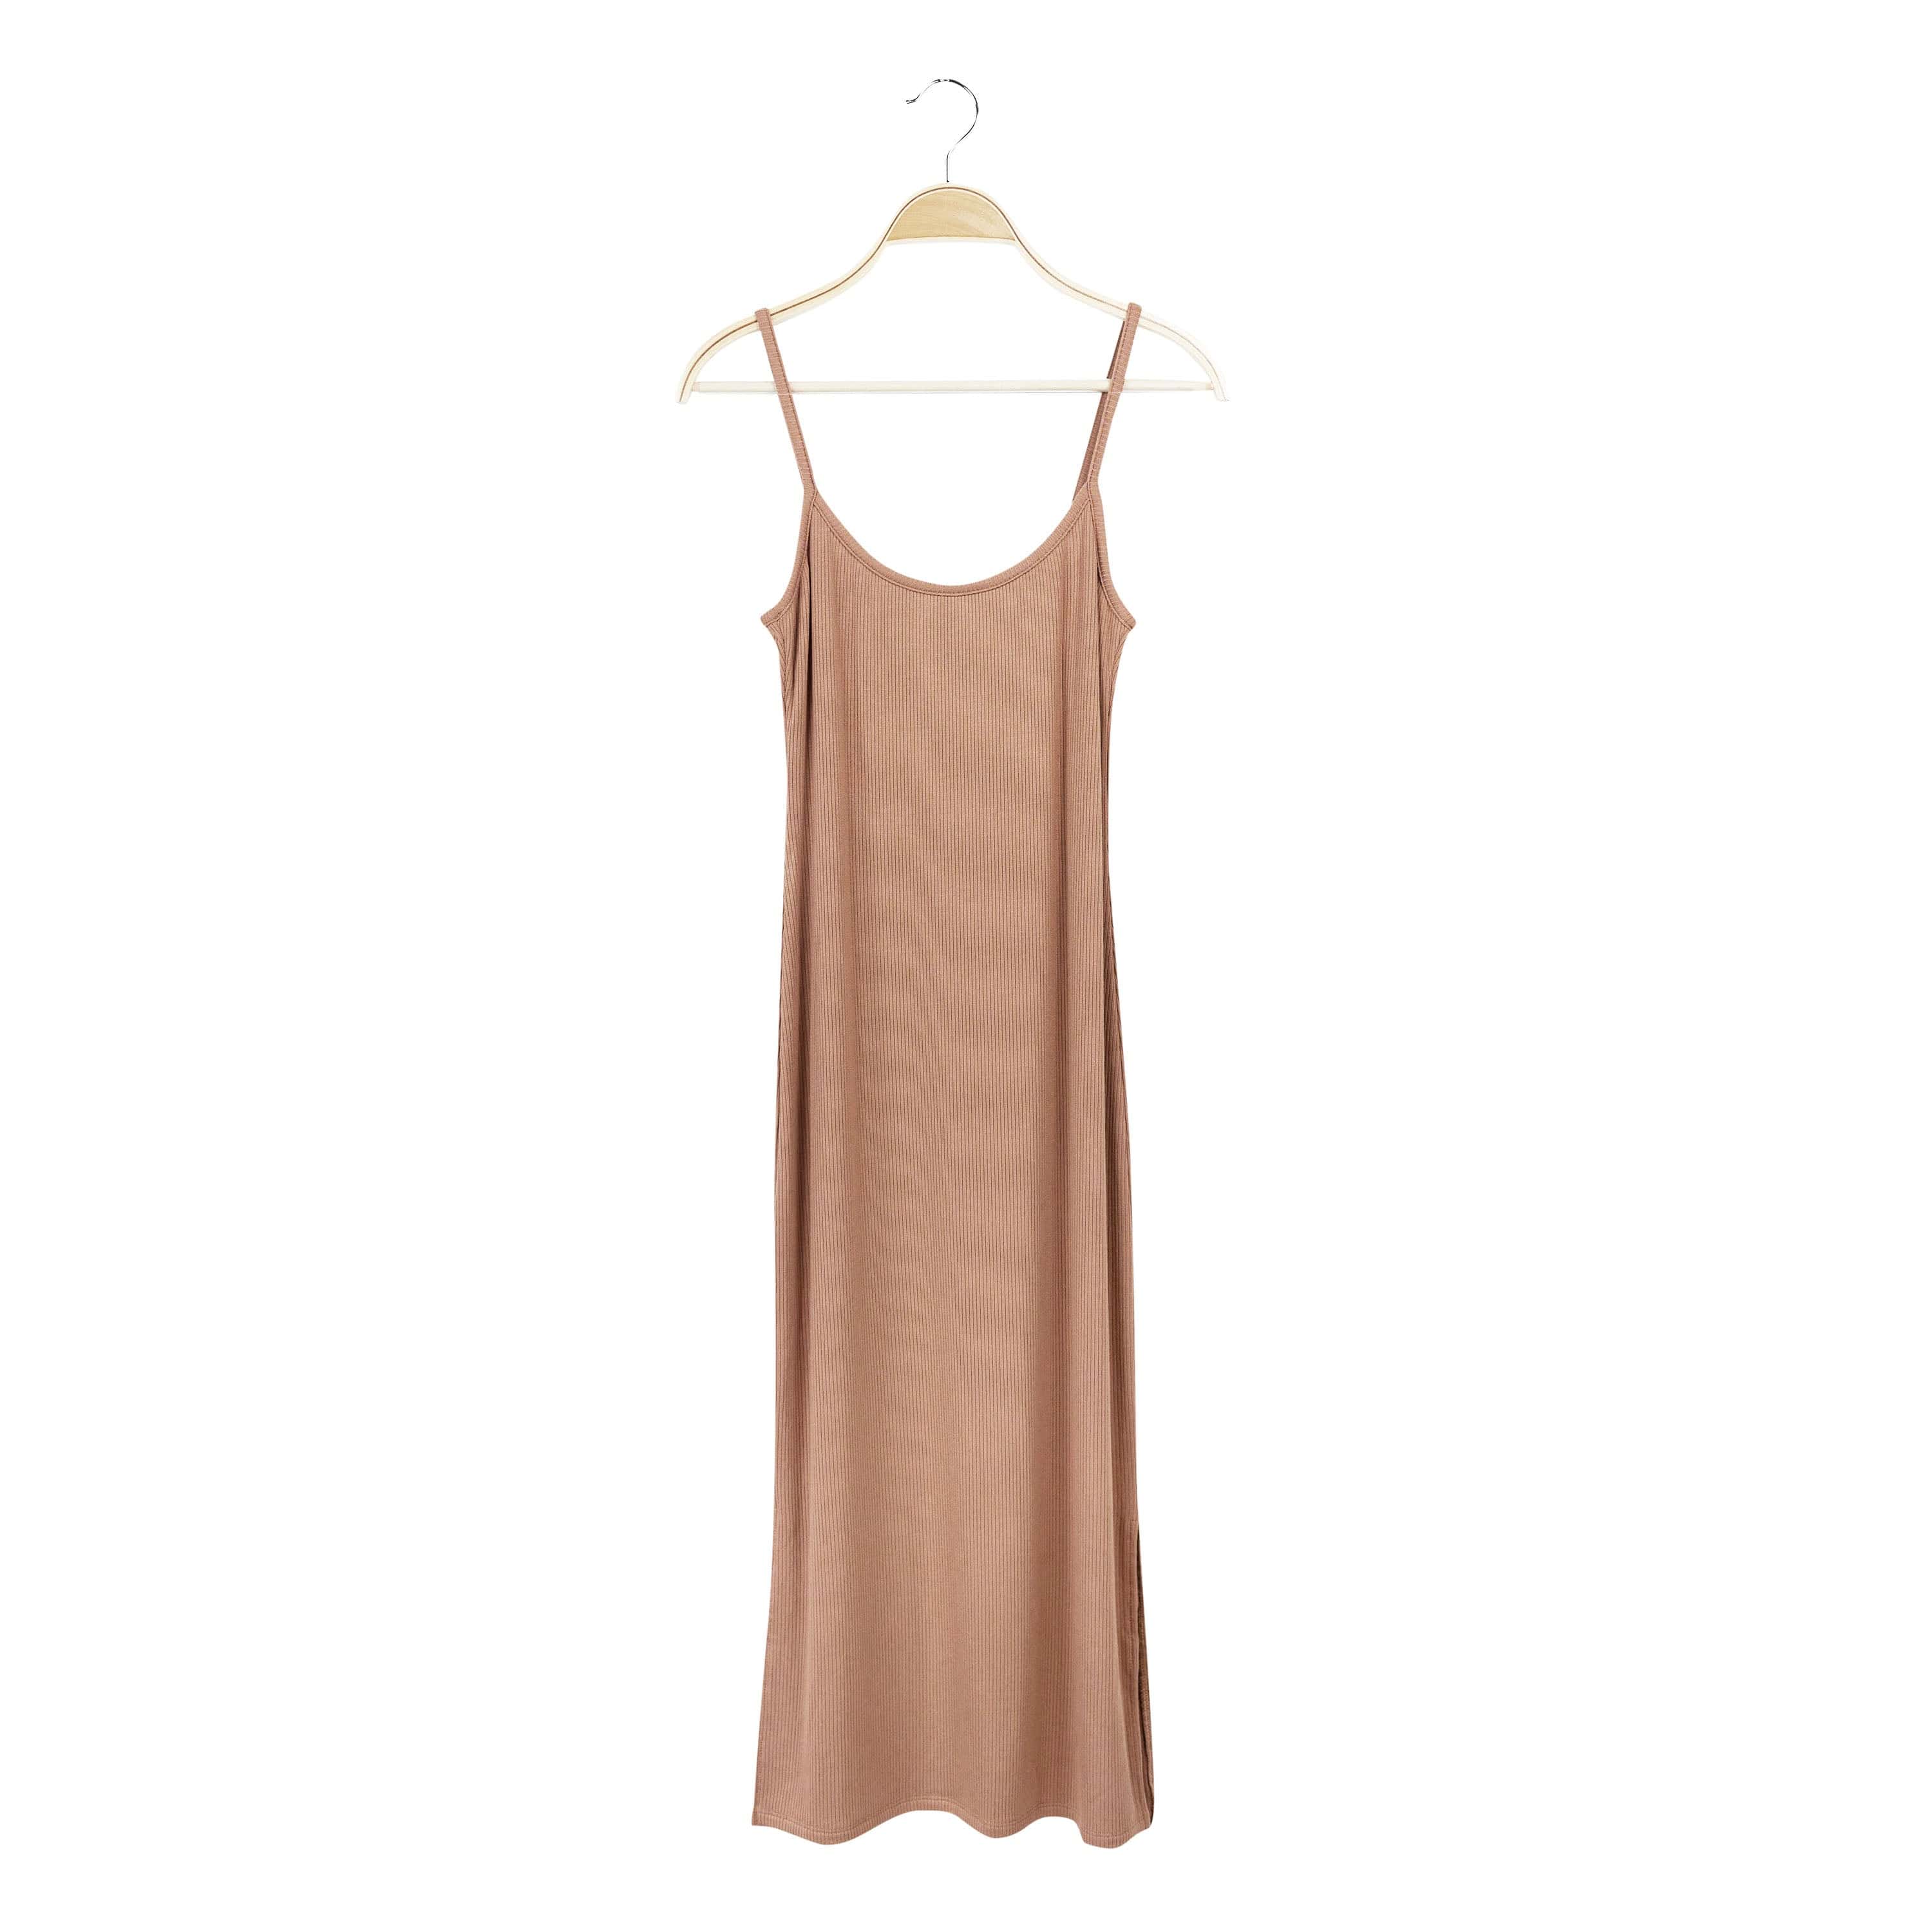 Kyte Baby Ribbed Women's Cami Dress Women's Ribbed Cami Dress in Latte